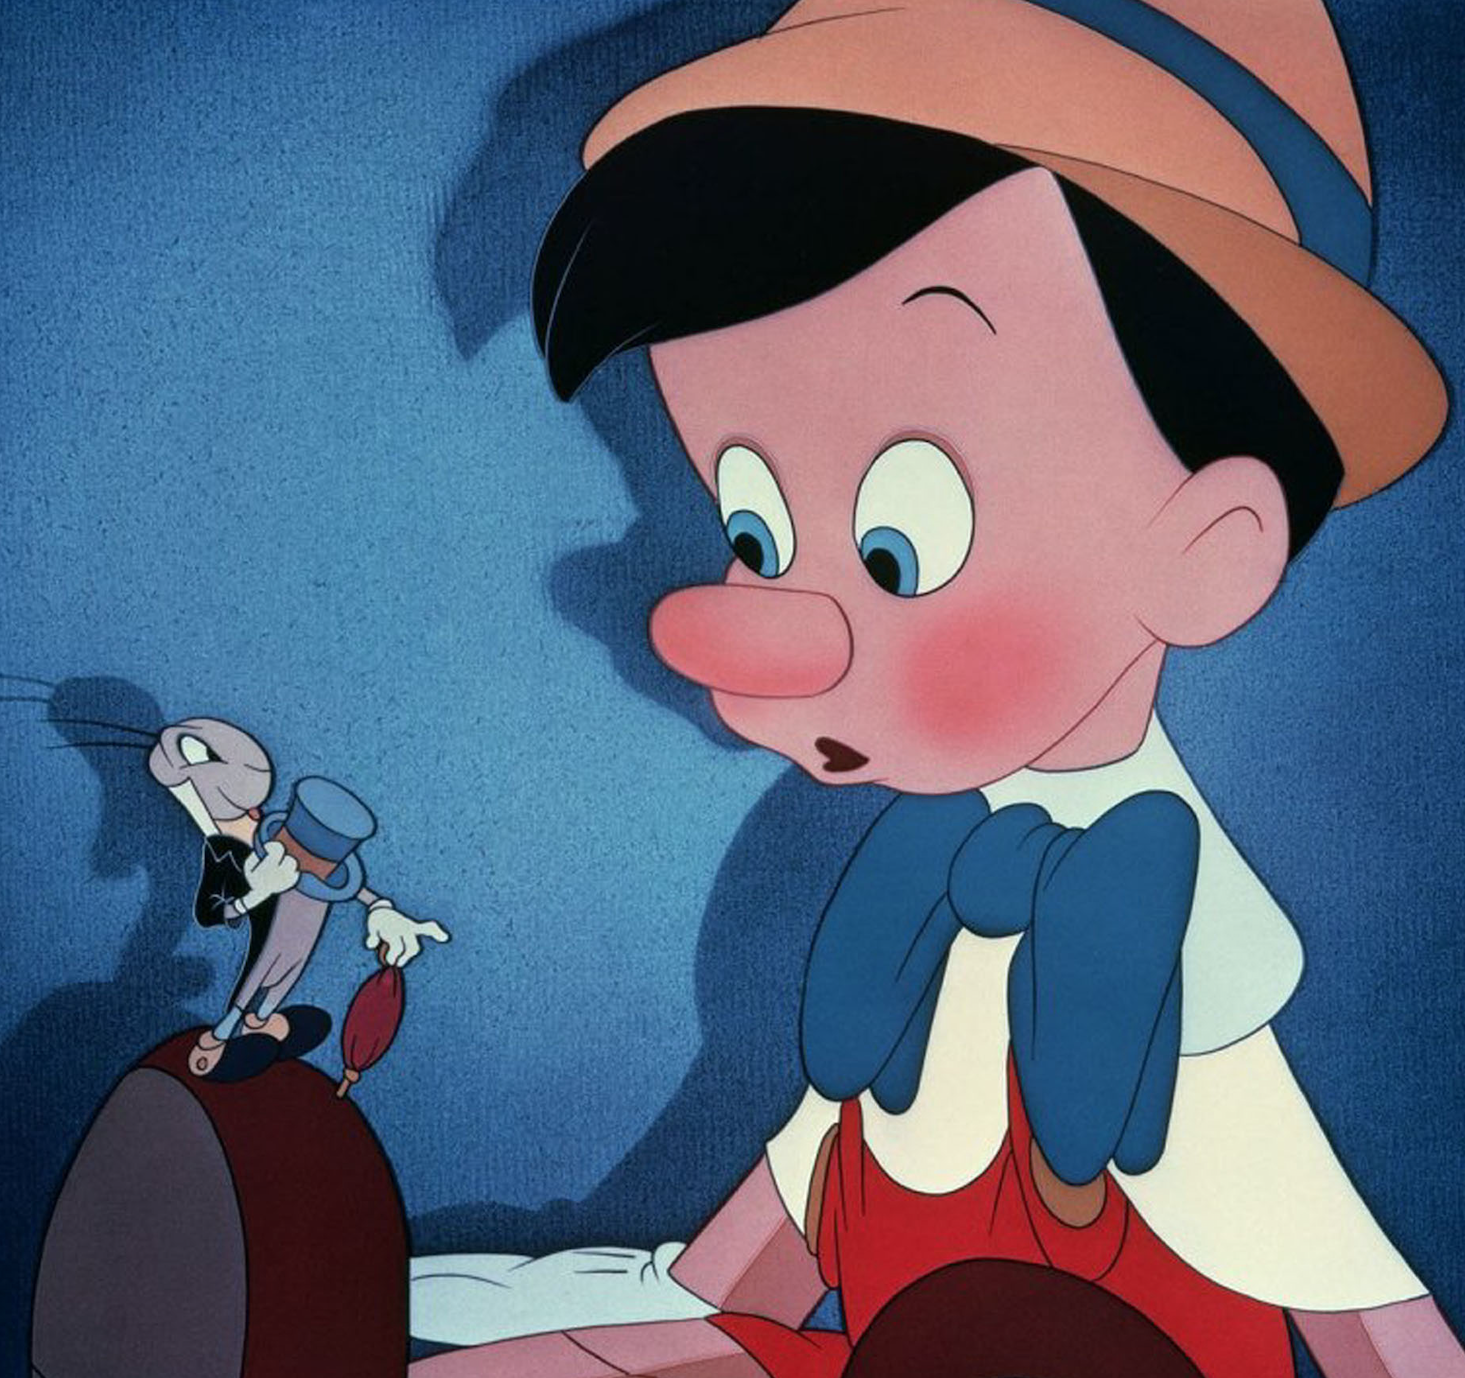 Dick Jones as Pinocchio and Cliff Edwards as Jiminy Cricket in the movie &quot;Pinocchio.&quot;